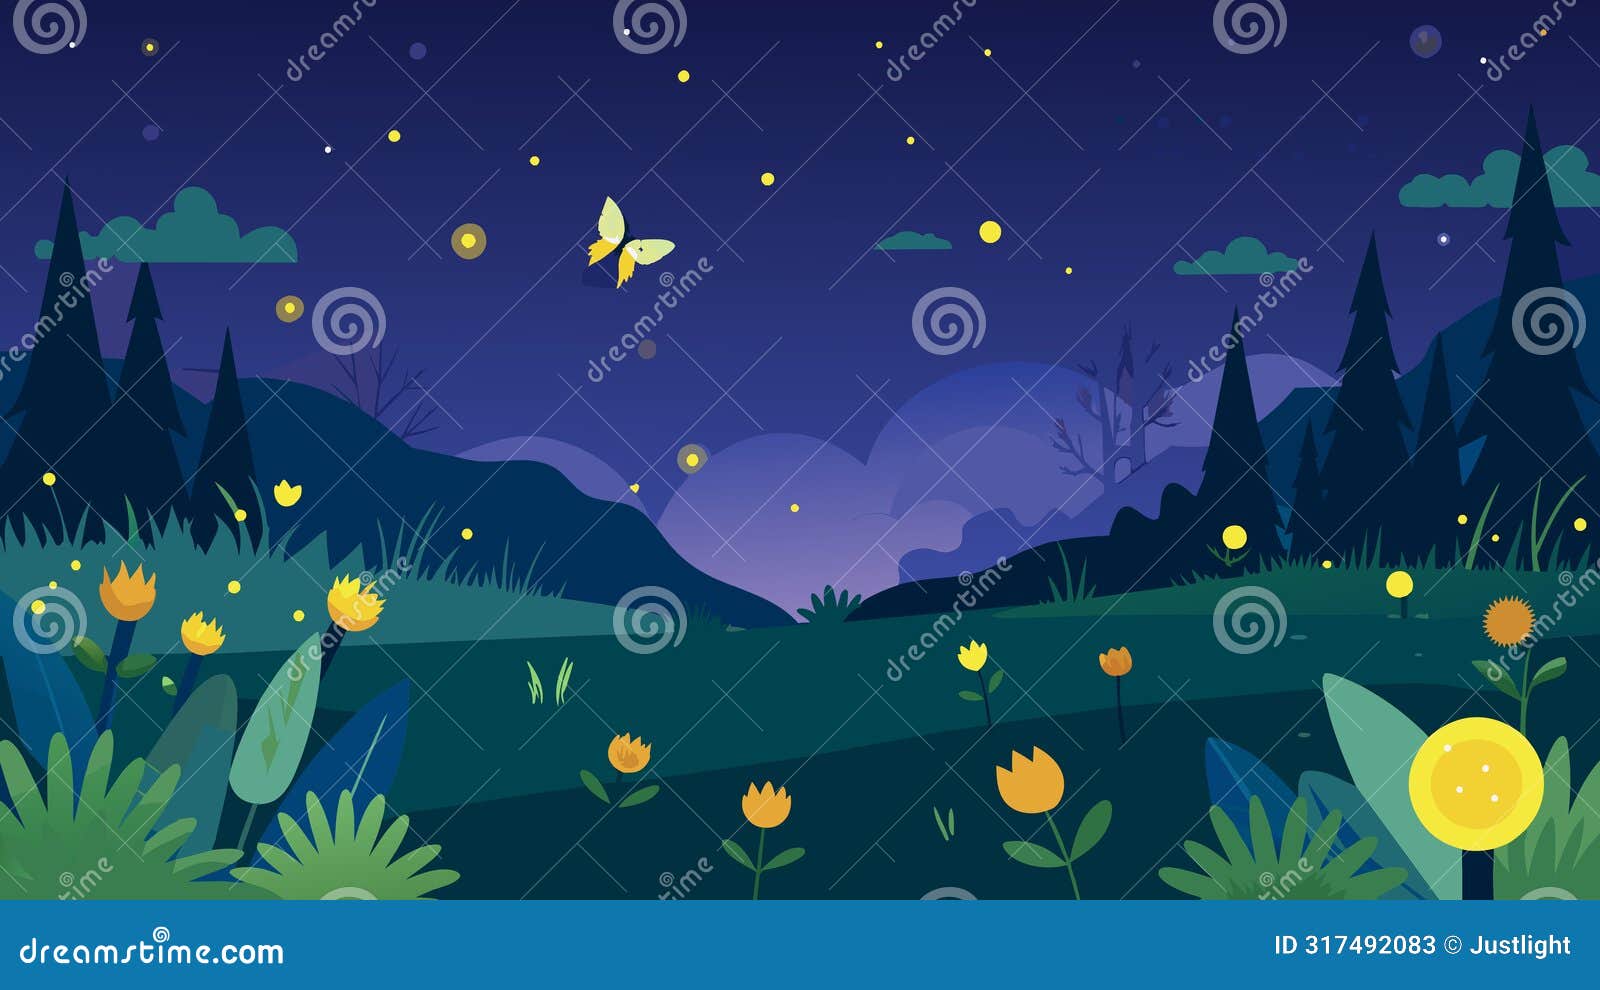 verses that describe the delicate dance of fireflies in a moonlit meadow a  of natures magic and wonder.. 